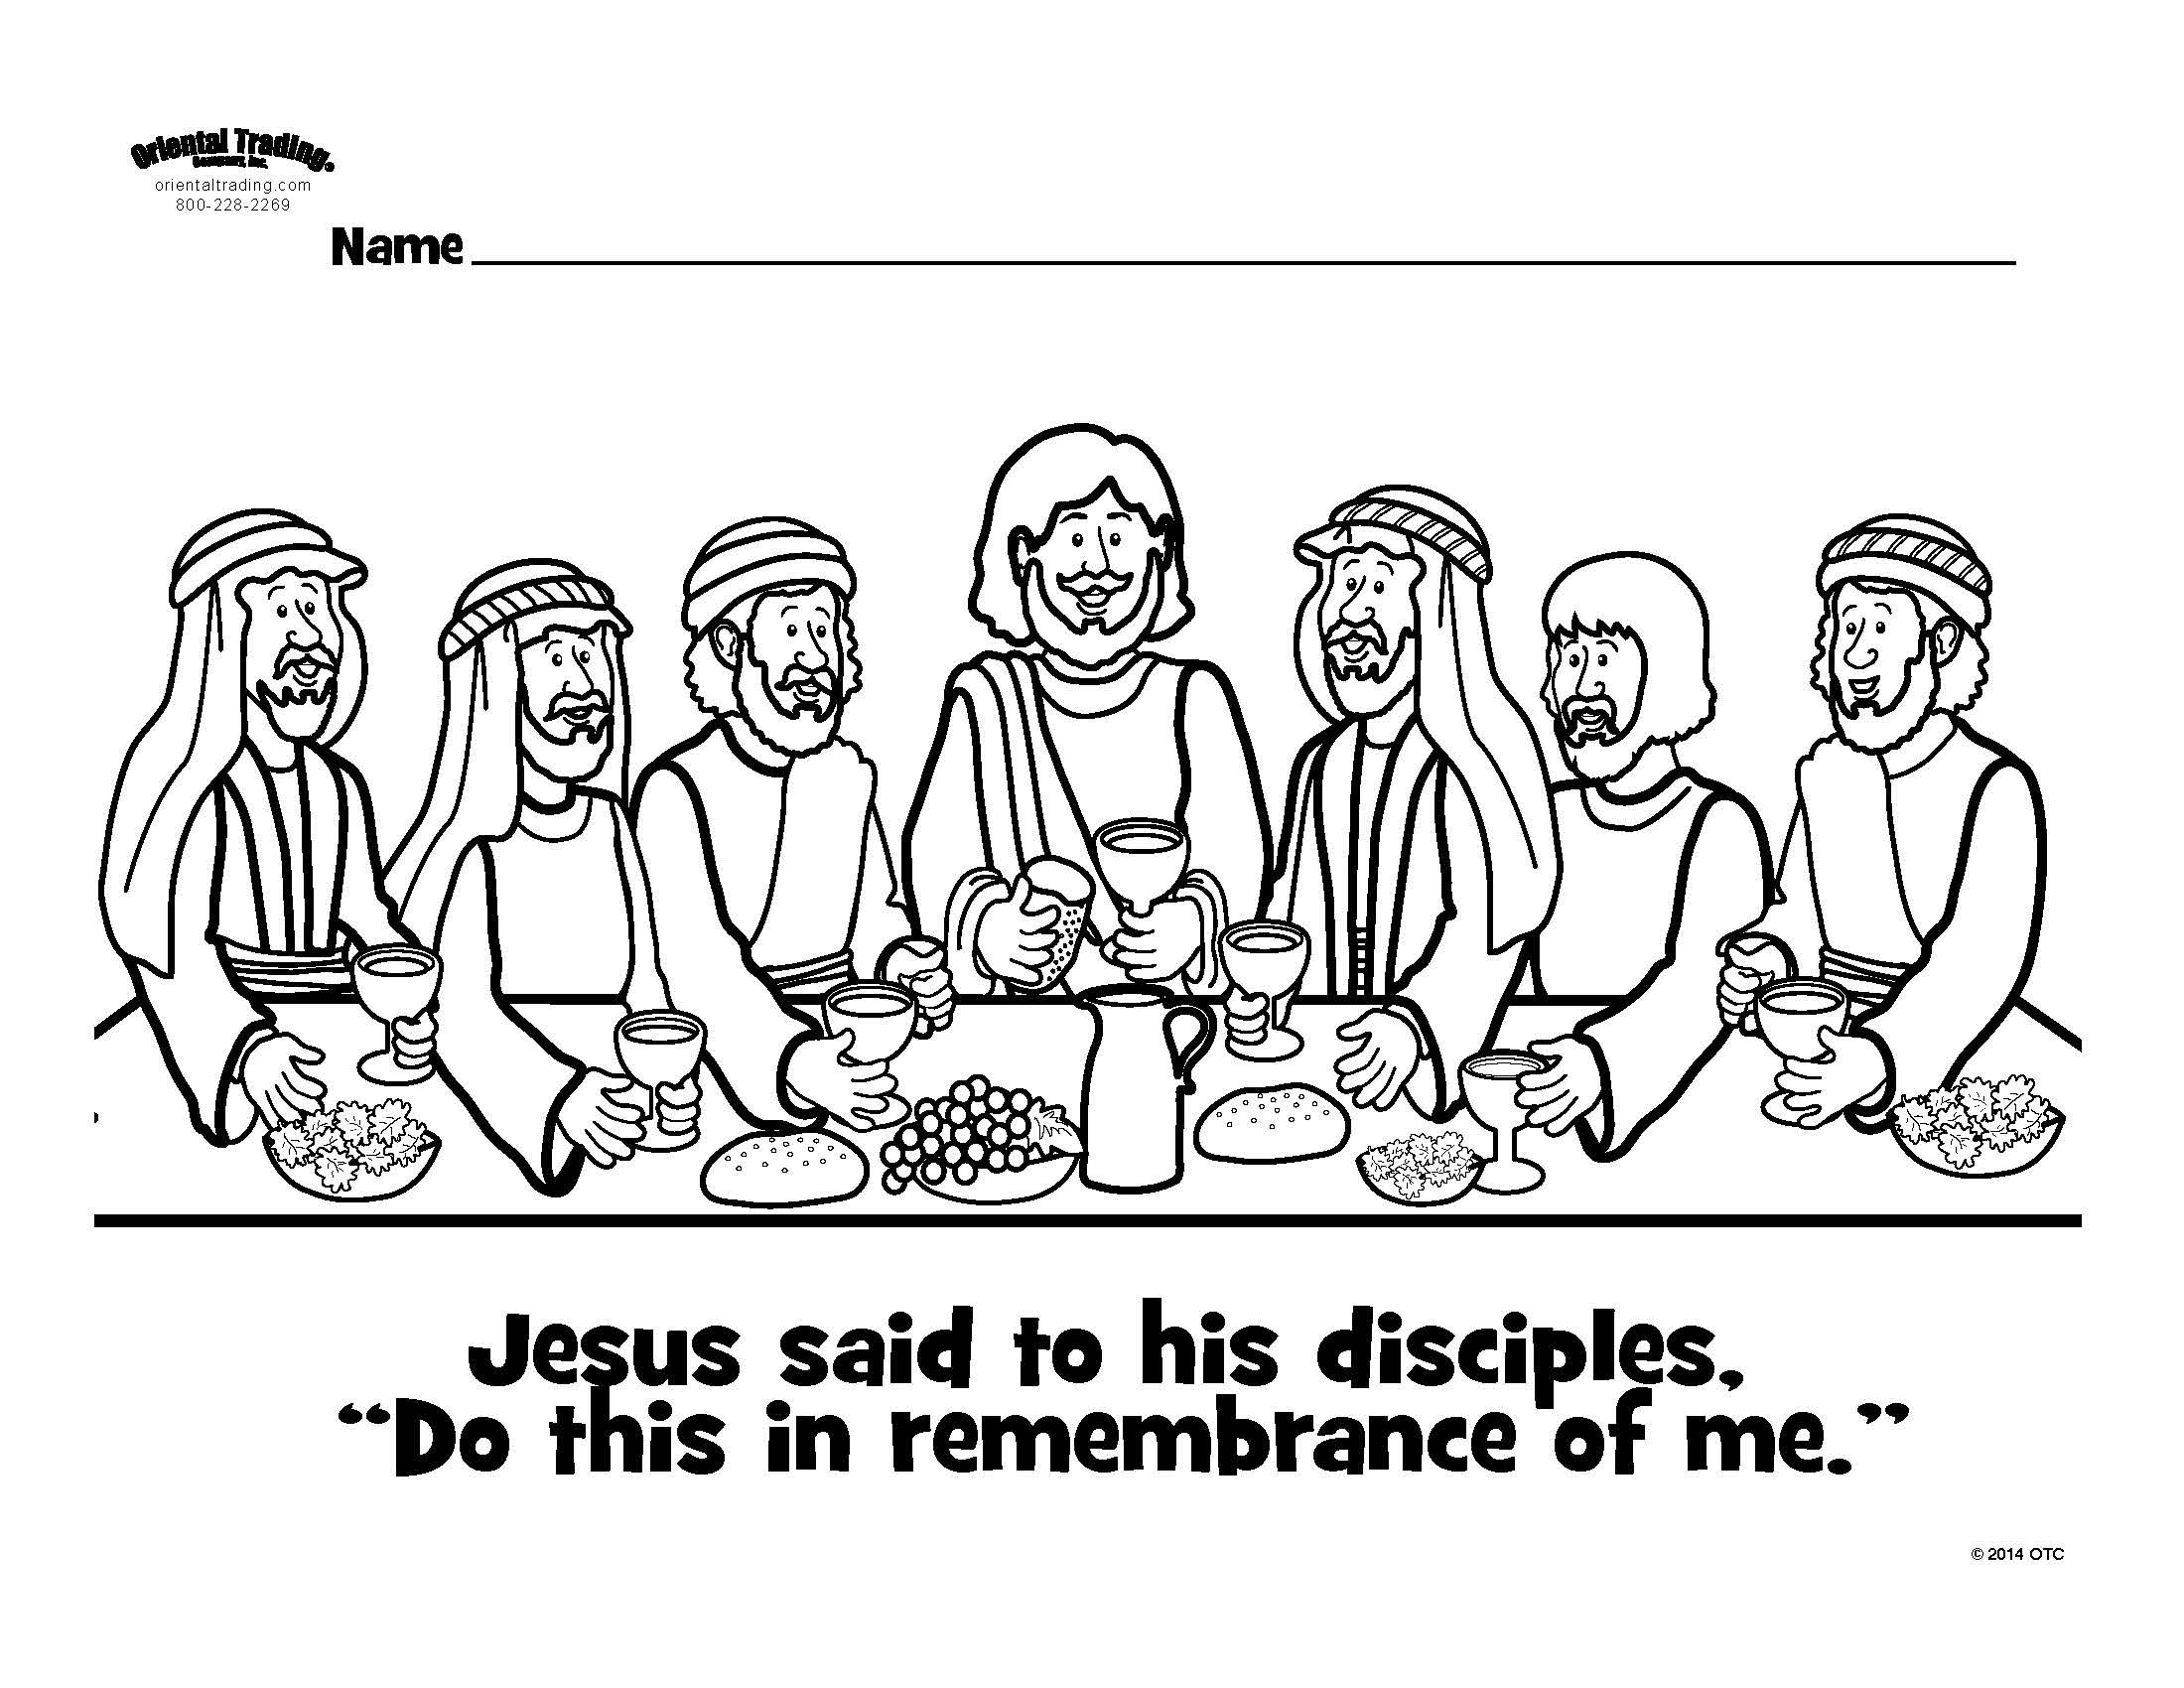 Last supper colouring page sunday school kids sunday school activities sunday school crafts